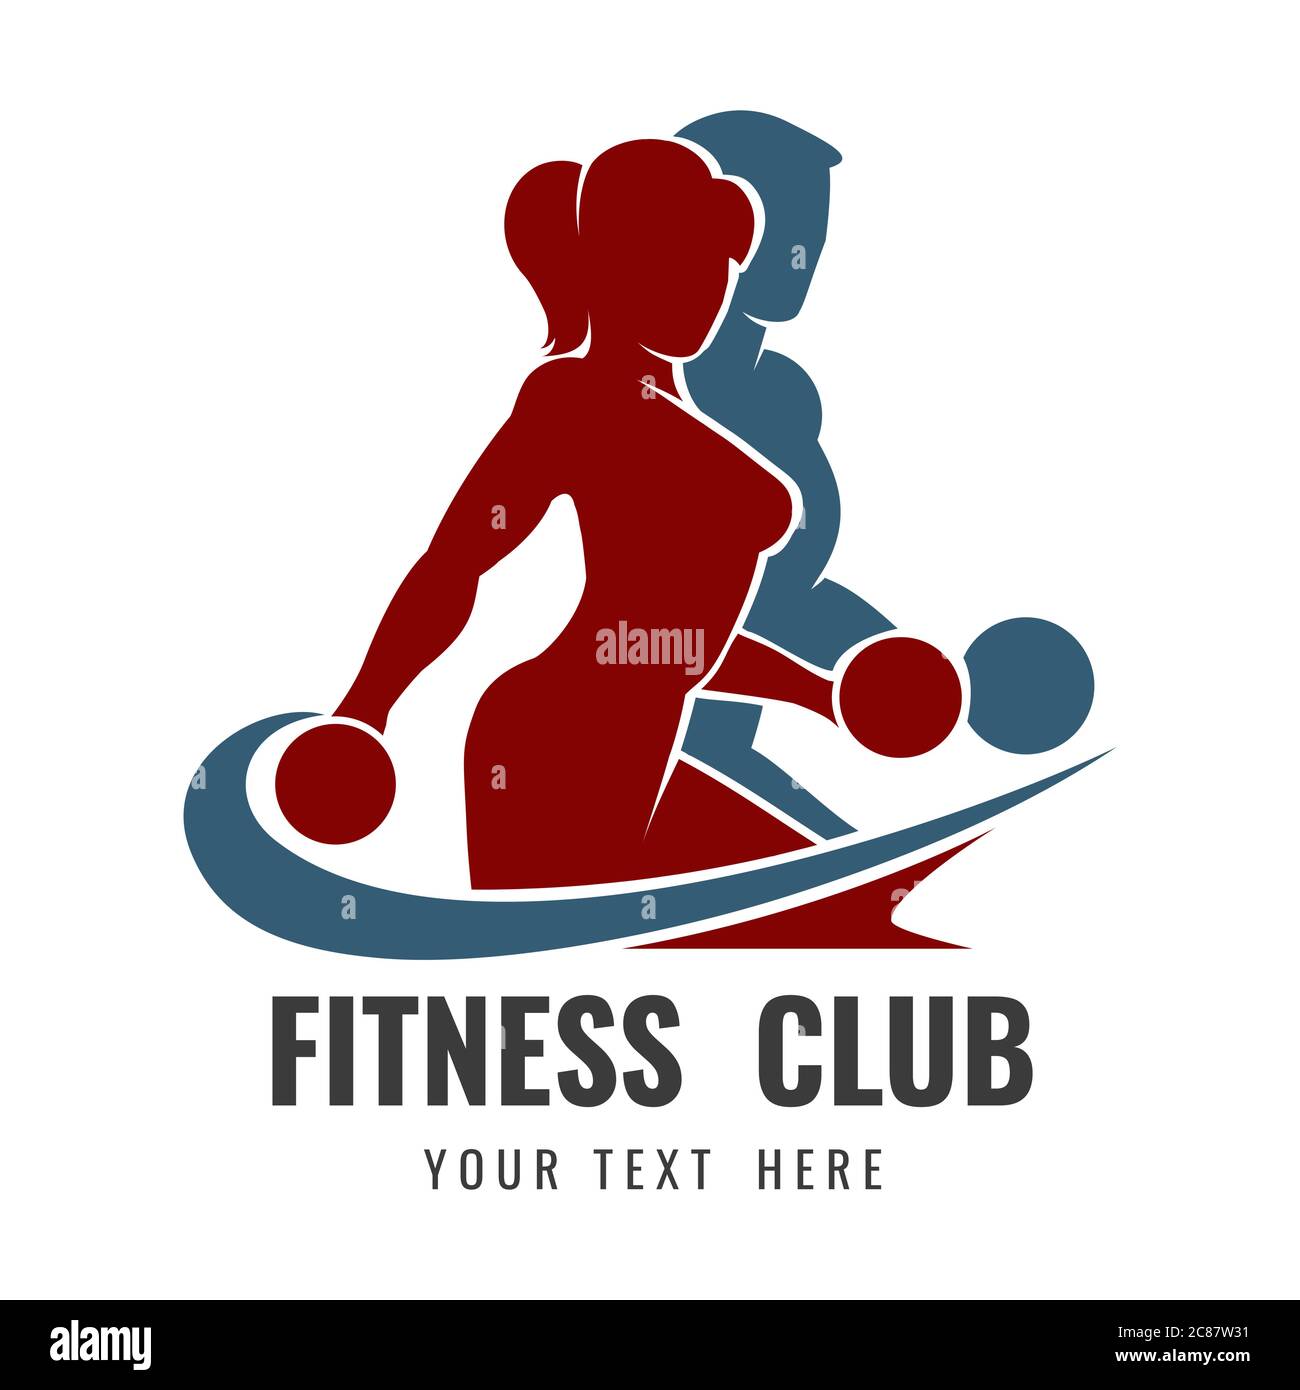 Fitness Club Logo or Emblem design. Training man and woman silhouettes with dumbbell. Vector illustration. Stock Vector